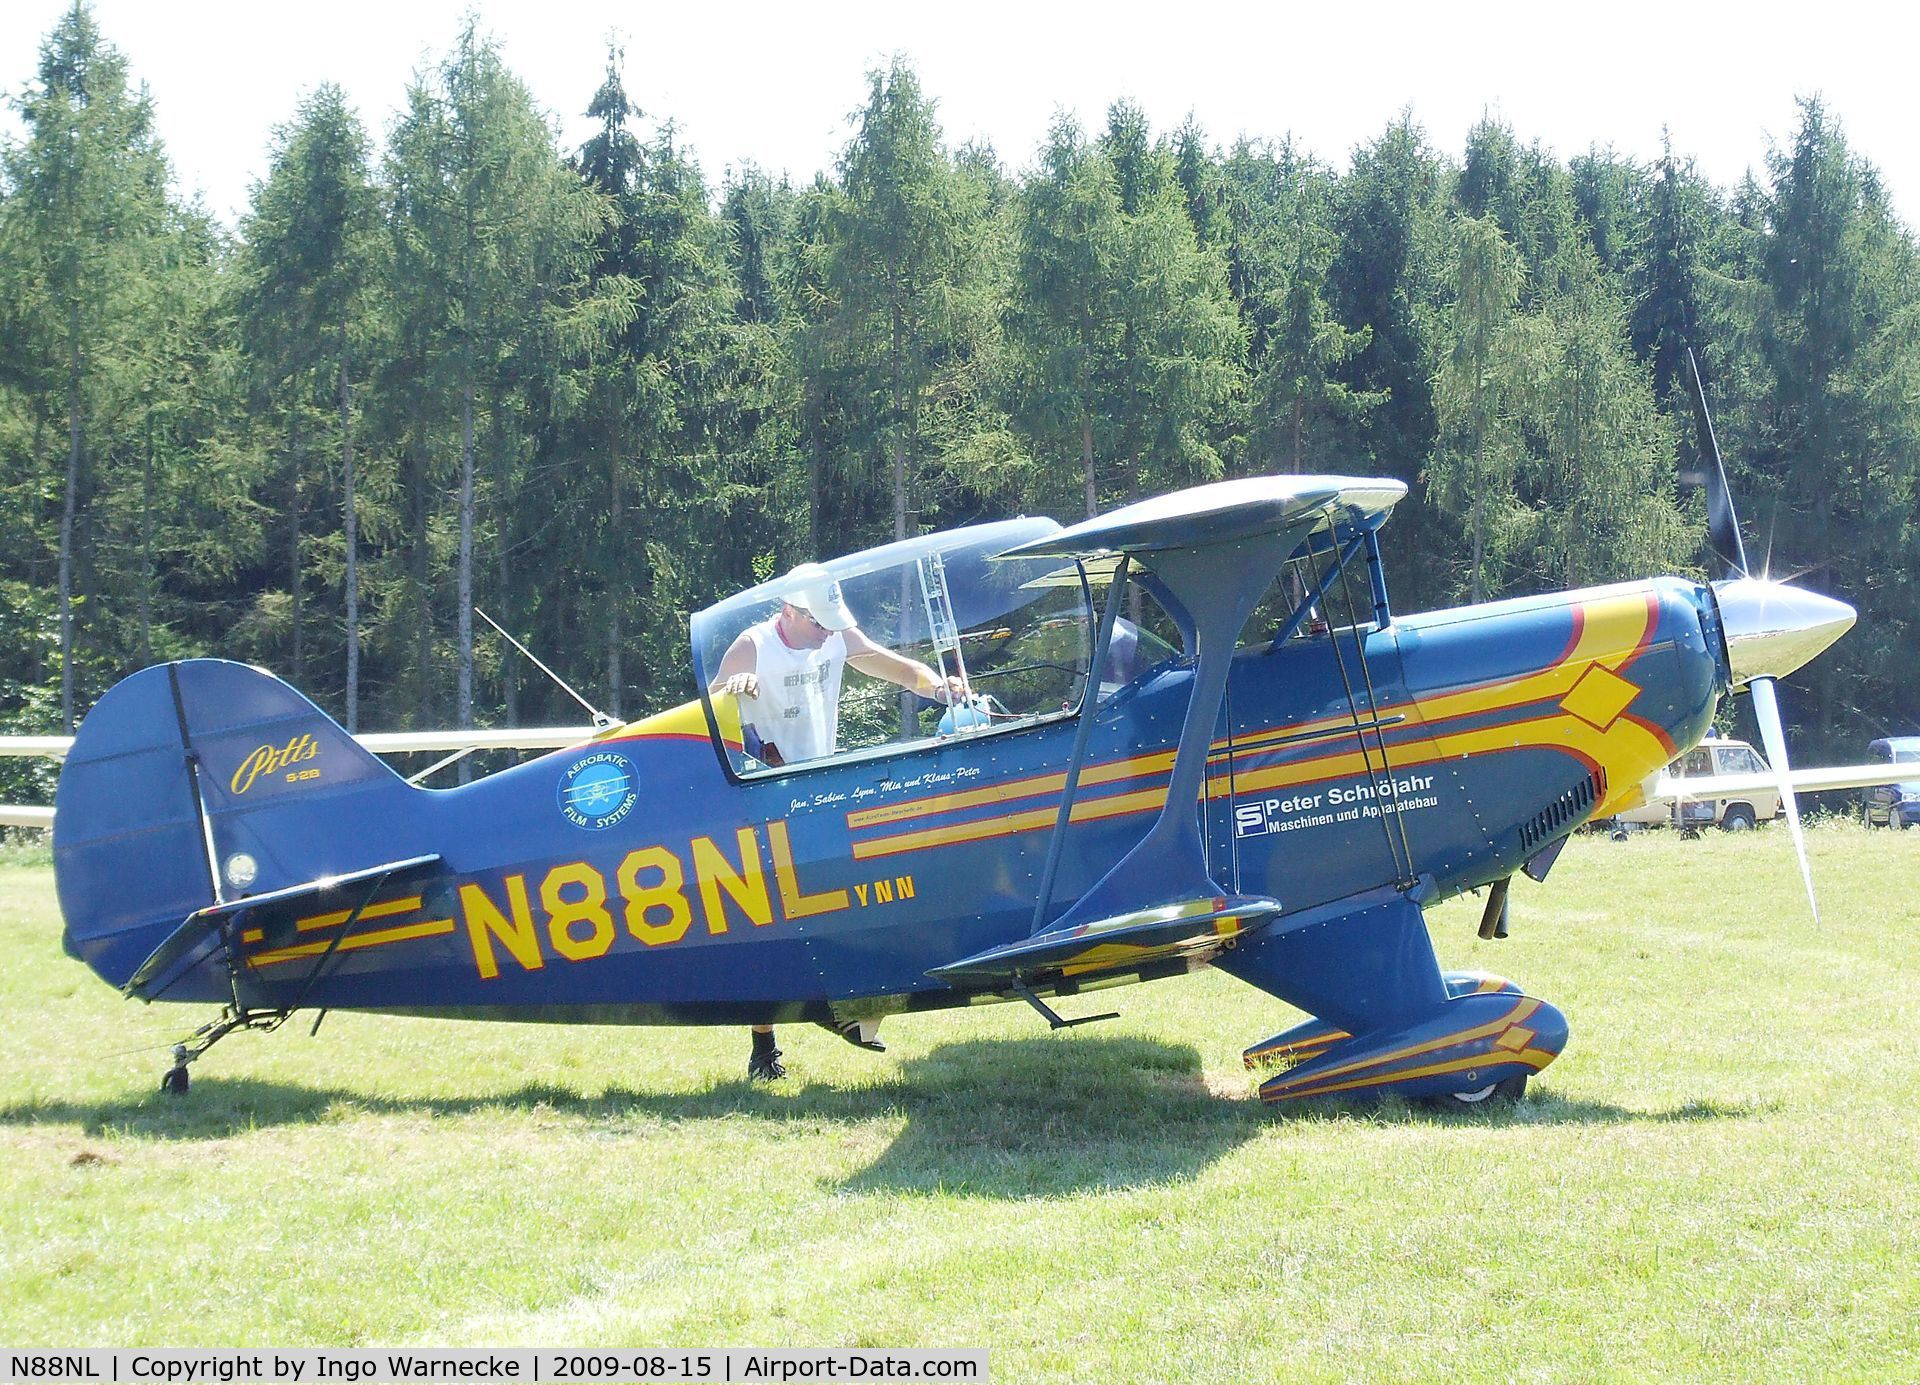 N88NL, 1988 Christen Pitts S-2B Special C/N 5147, Christen Pitts S-2B at the Montabaur airshow 2009